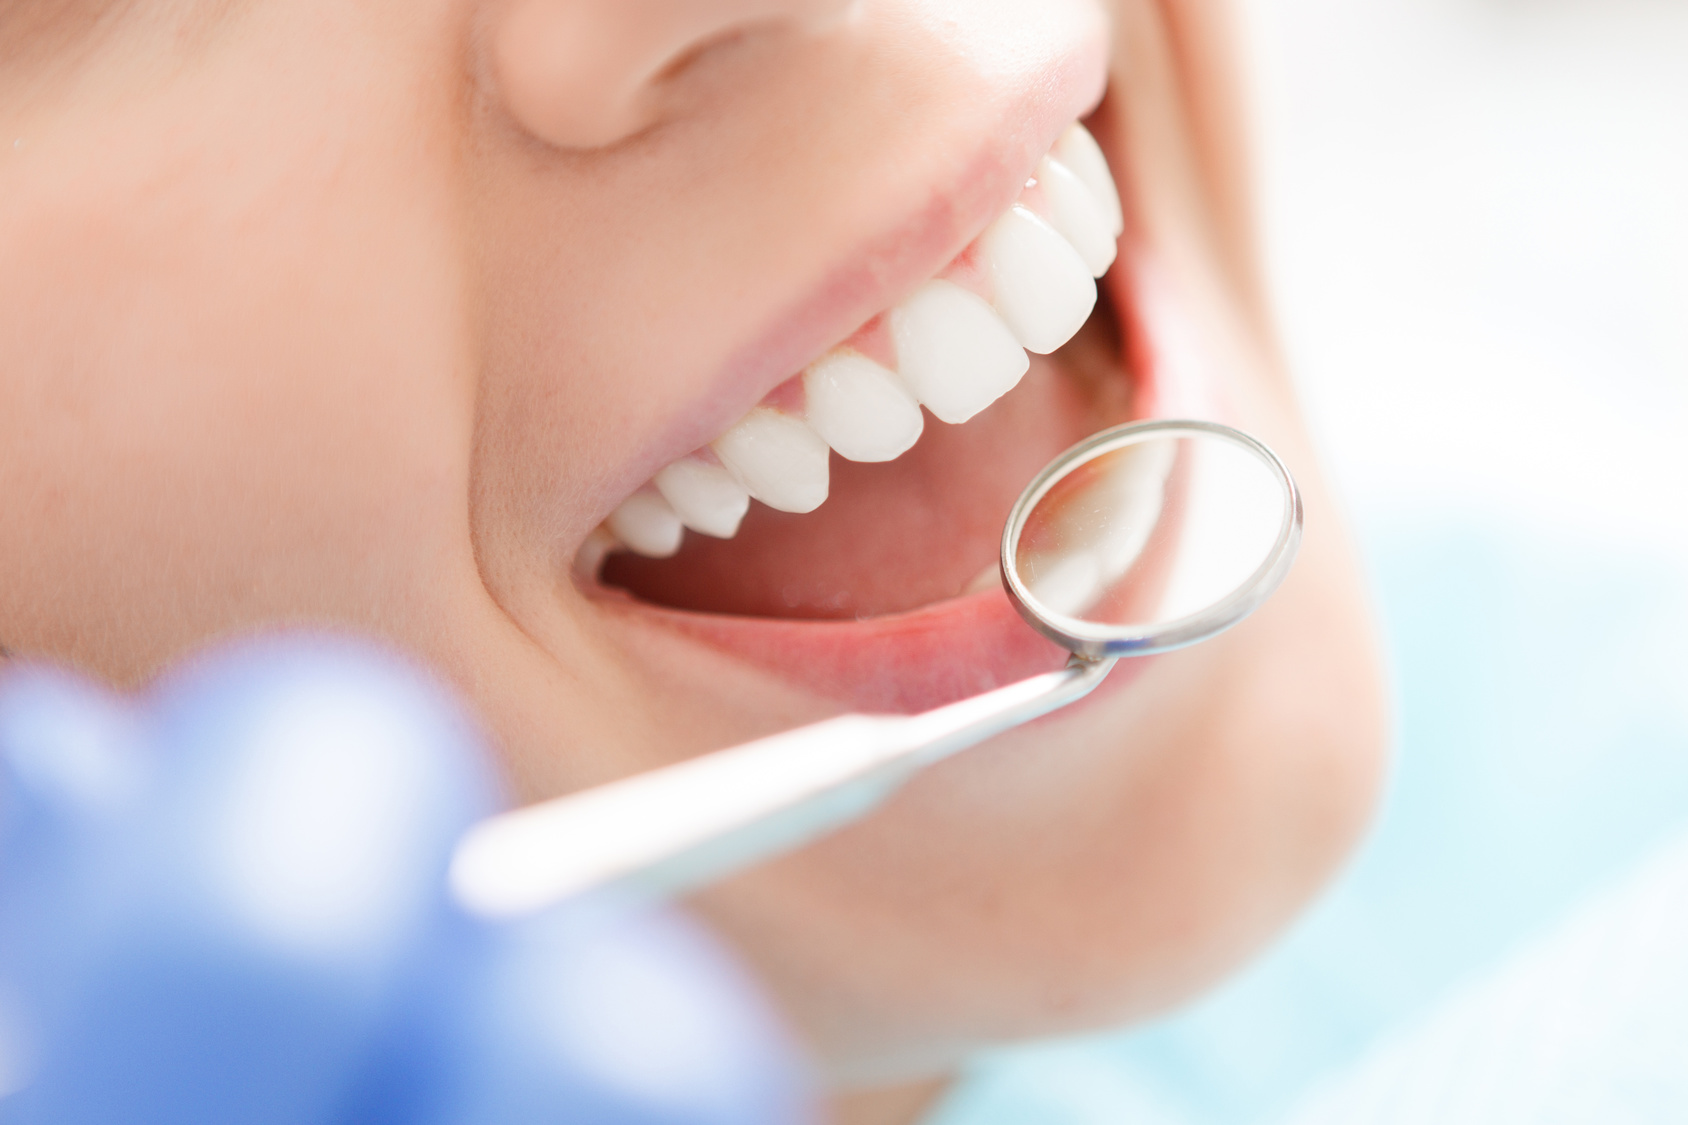 What Constitutes Managed Care For Oral Health?